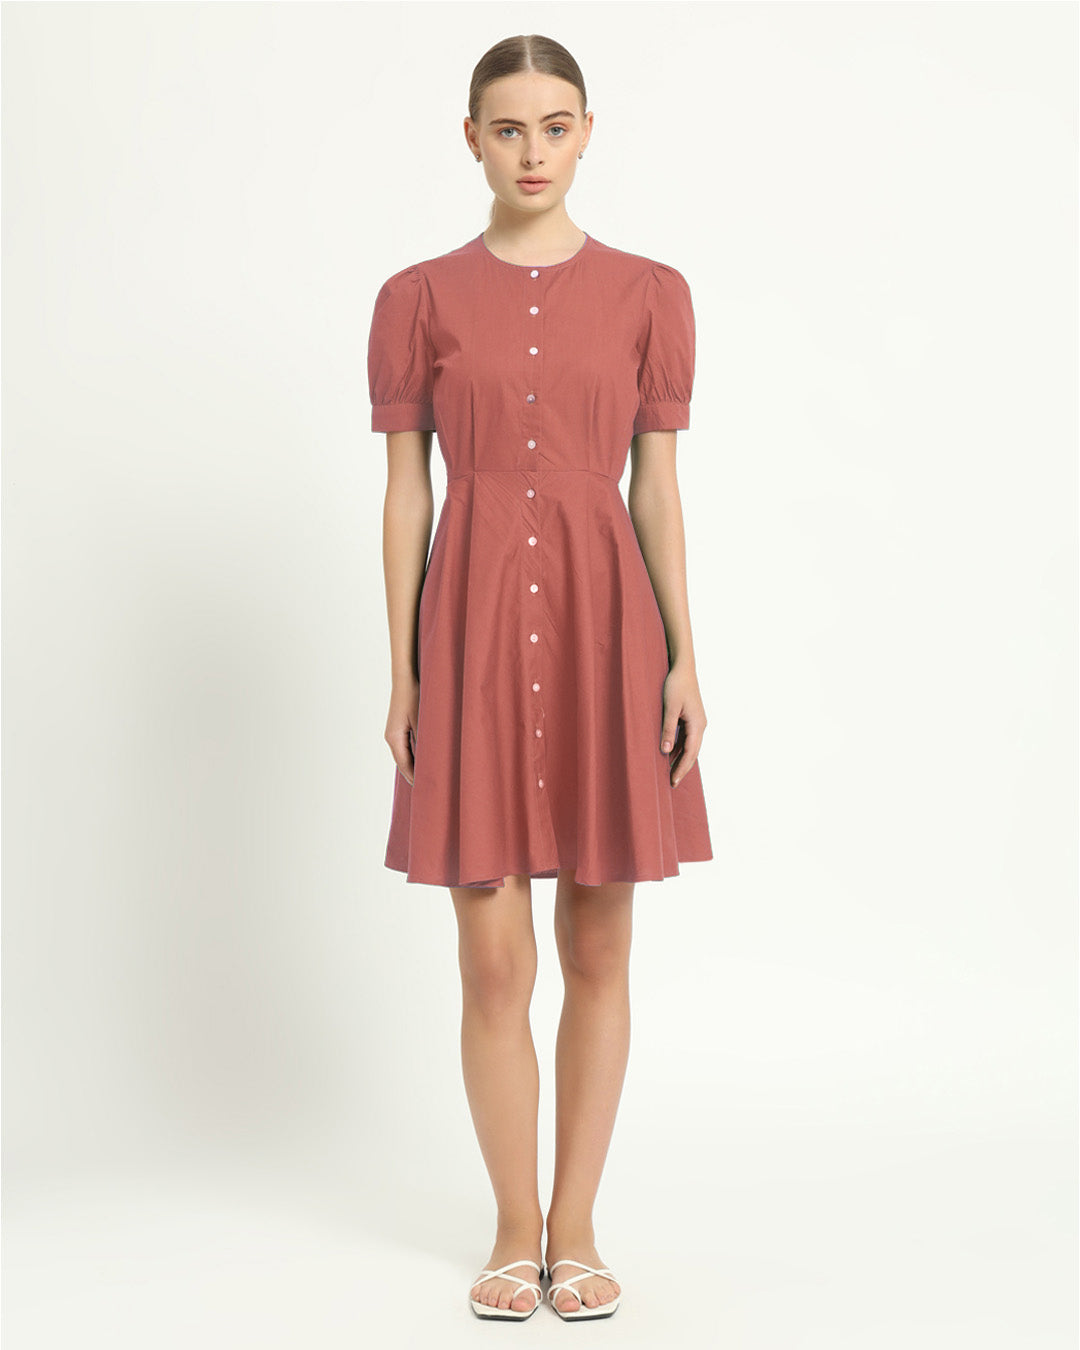 The Kittsee Ivory Pink Cotton Dress